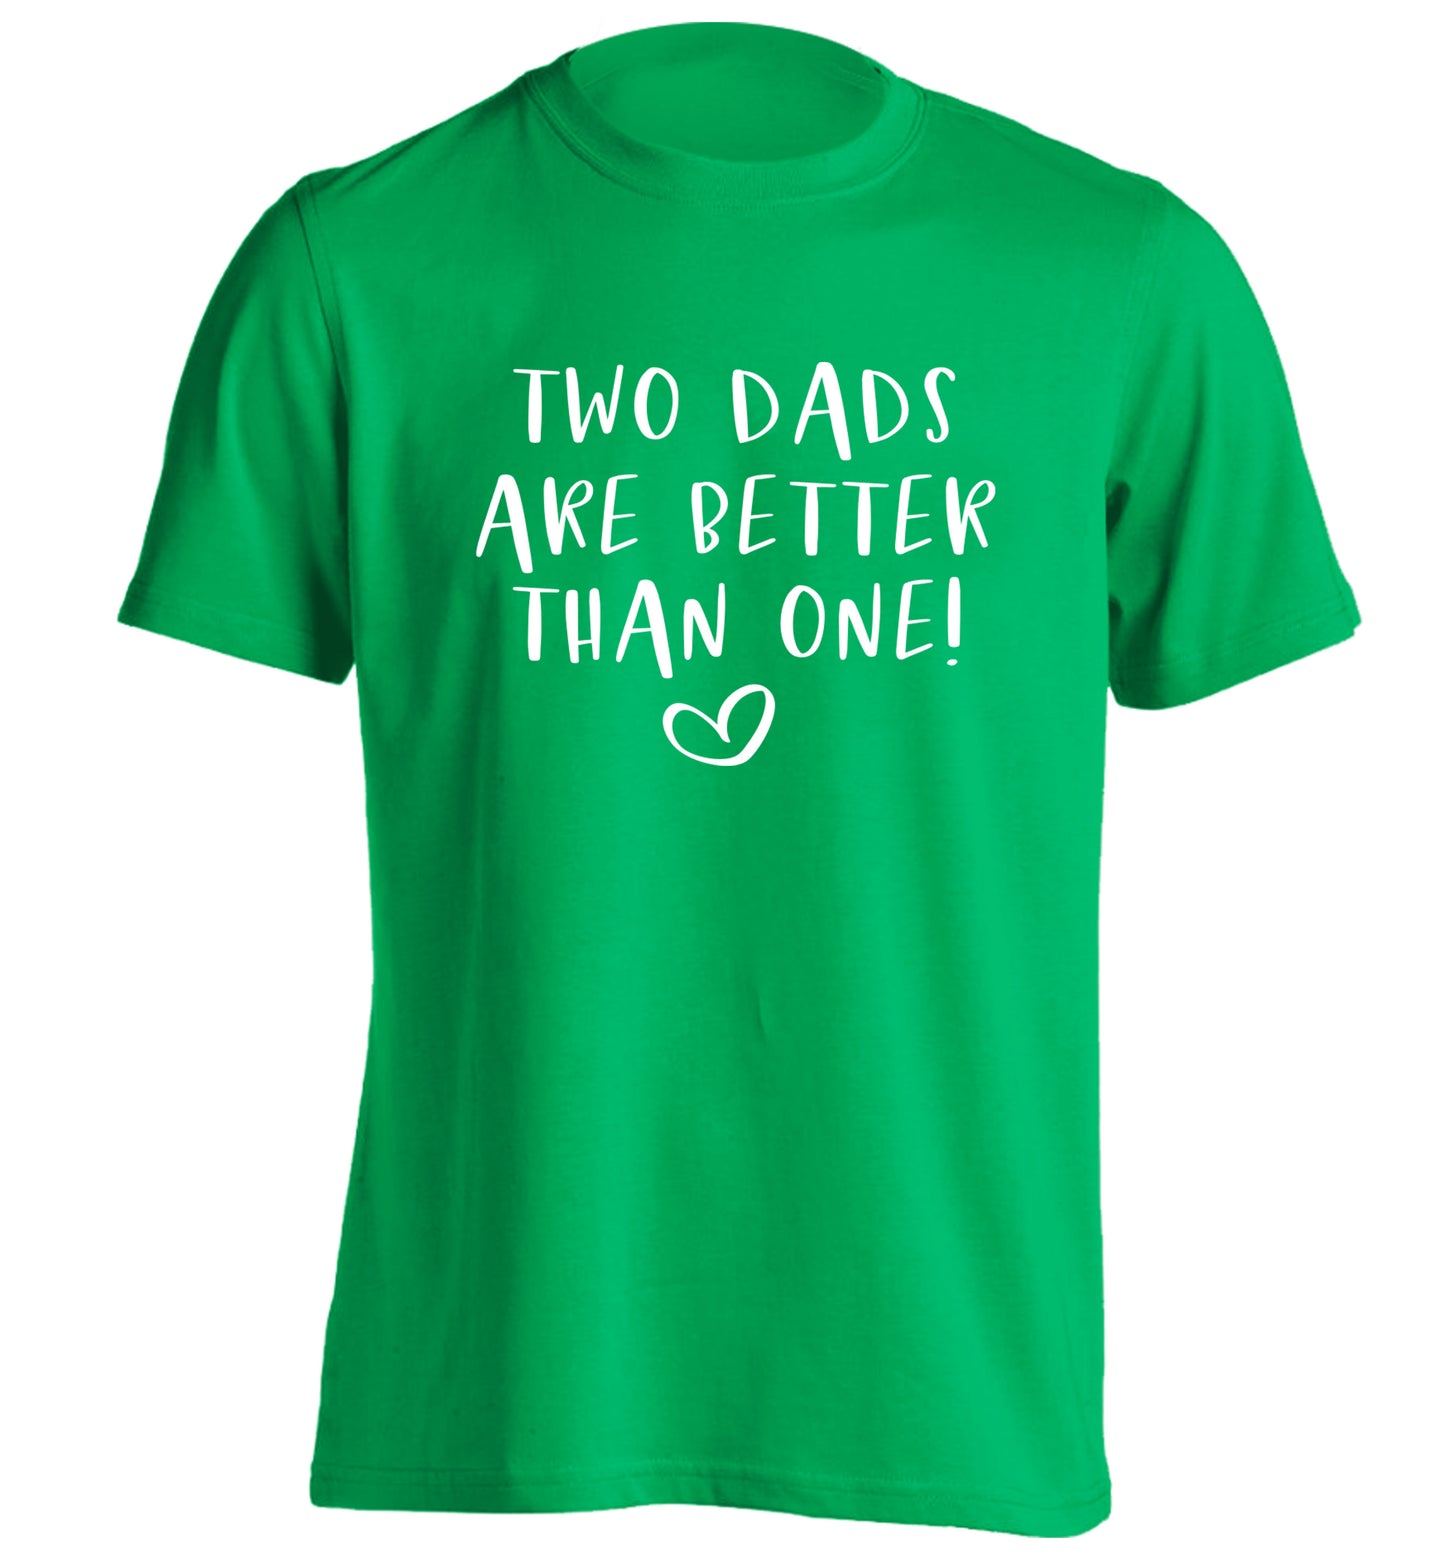 Two dads are better than one adults unisex green Tshirt 2XL